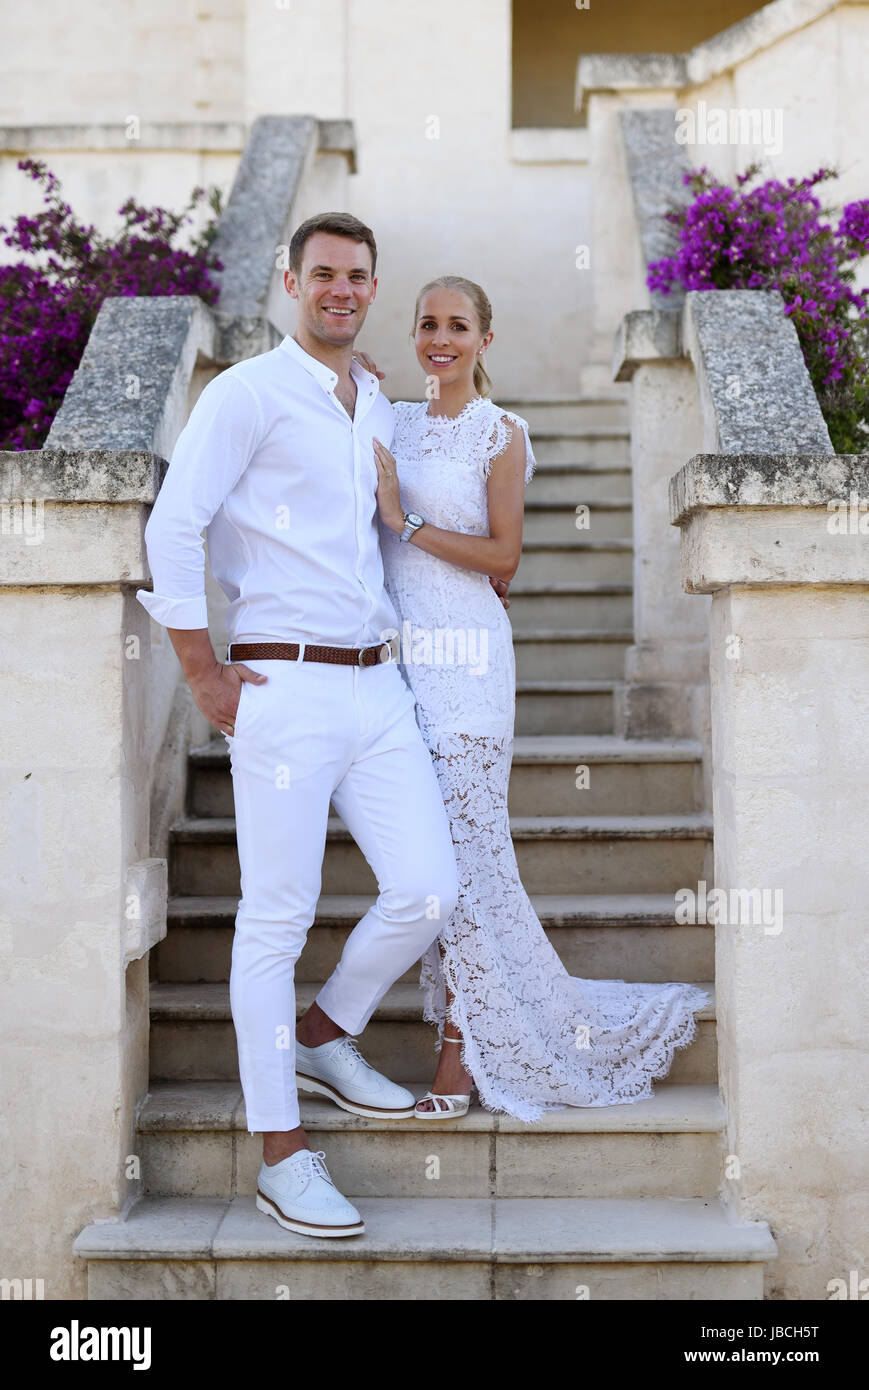 Monopoli, Italy. 09th June, 2017. HANDOUT - A handout picture made available on 09 June 2017 shows German soccer national player and German Bundesliga goalkeeper of the FC Bayern Munich, Manuel Neuer, and his wife Nina Neuer (née Weiss) shortly after the church wedding in Monopoli, Italy, 09 June 2017. (ATTENTION EDITORS: FOR EDITORIAL USE ONLY IN CONNECTION WITH CURRENT REPORTING/ MANDATORY CREDIT) · NO WIRE SERVICE · Photo: Pia Clodi/peachesandmint.com/dpa/Alamy Live News Stock Photo